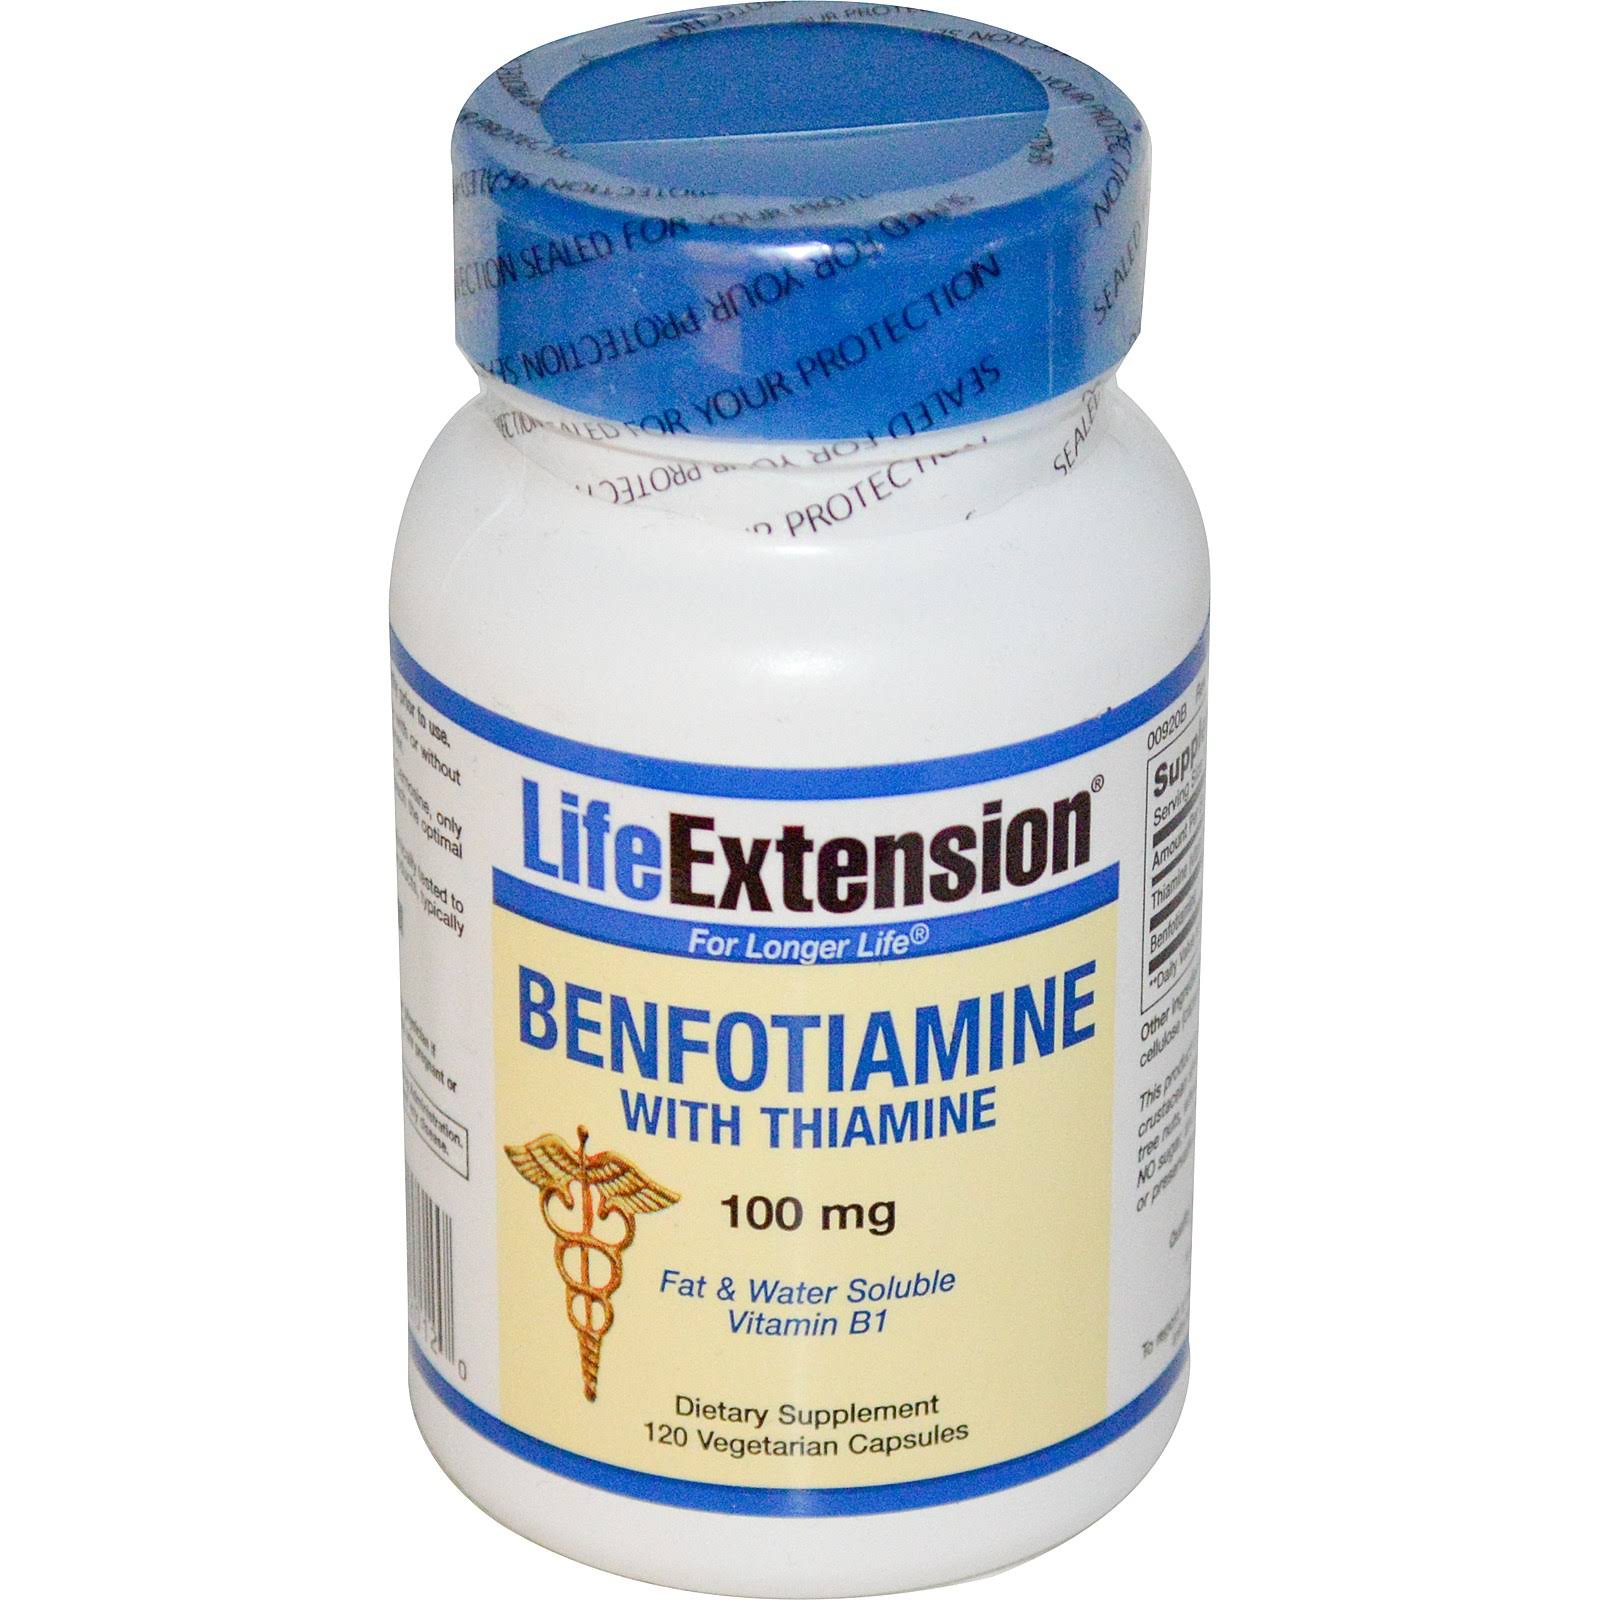 Life Extension Benfotiamine Supplement - With Thiamine, 100mg, 120ct